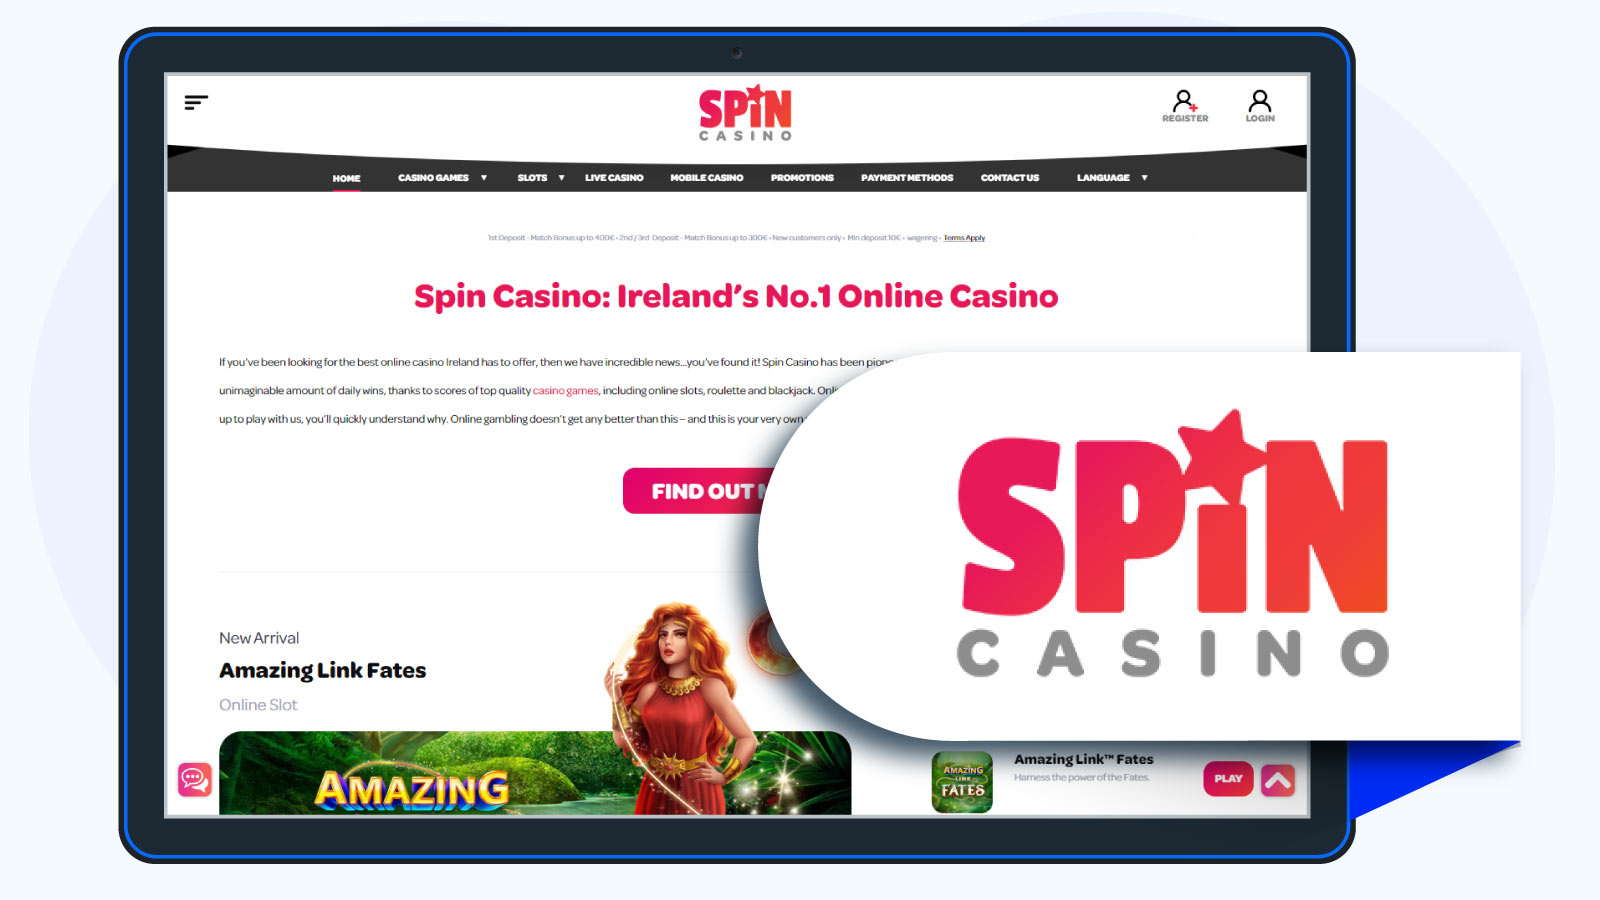 Spin Casino – The best offer to try out a casino with multiple game types